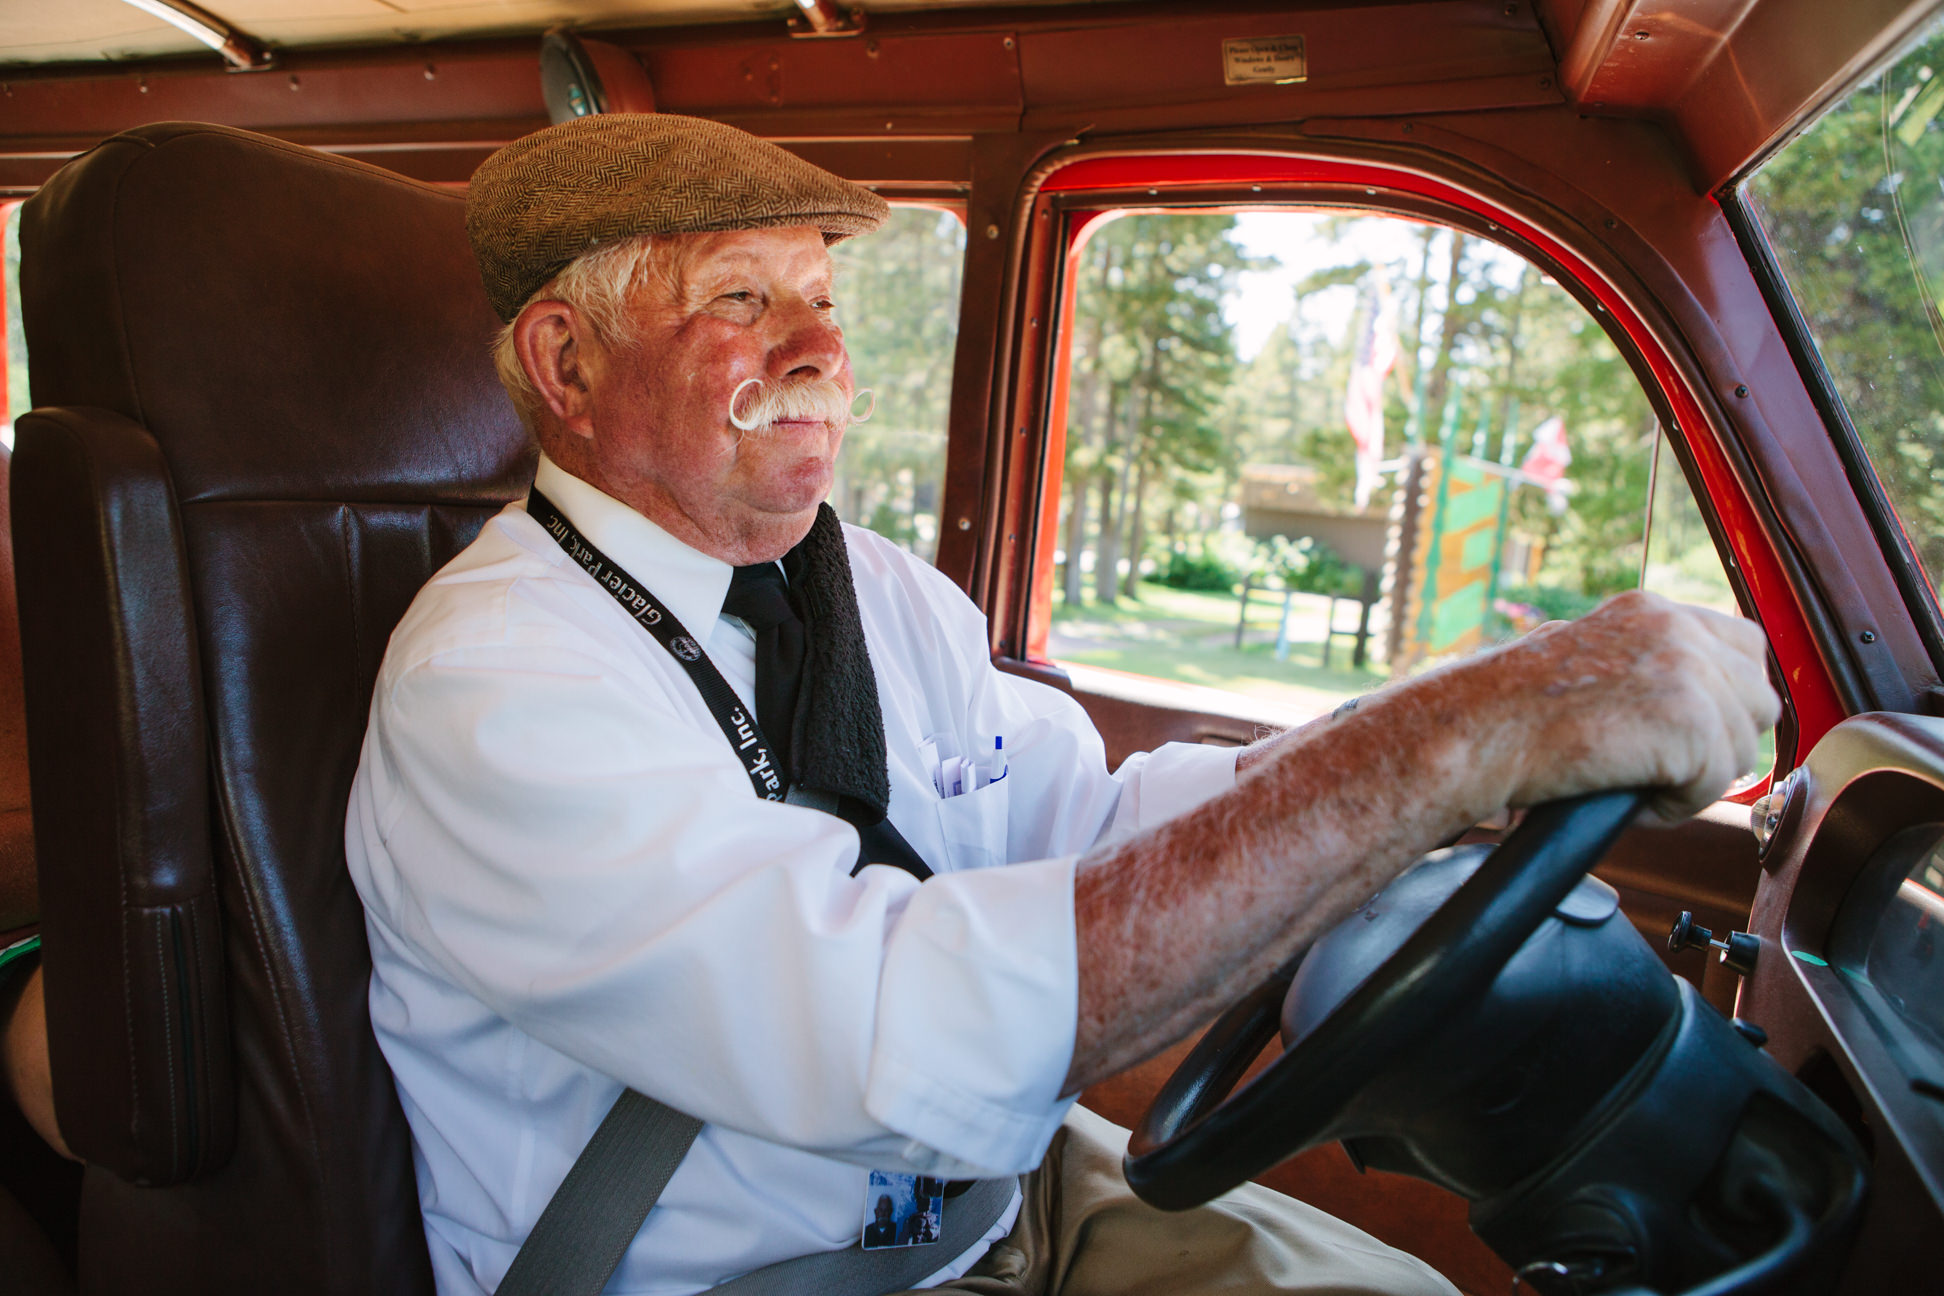 A red jammer bus driver with a handlebar mustache drives the Going-to-the-Sun Road in Glacier National Park